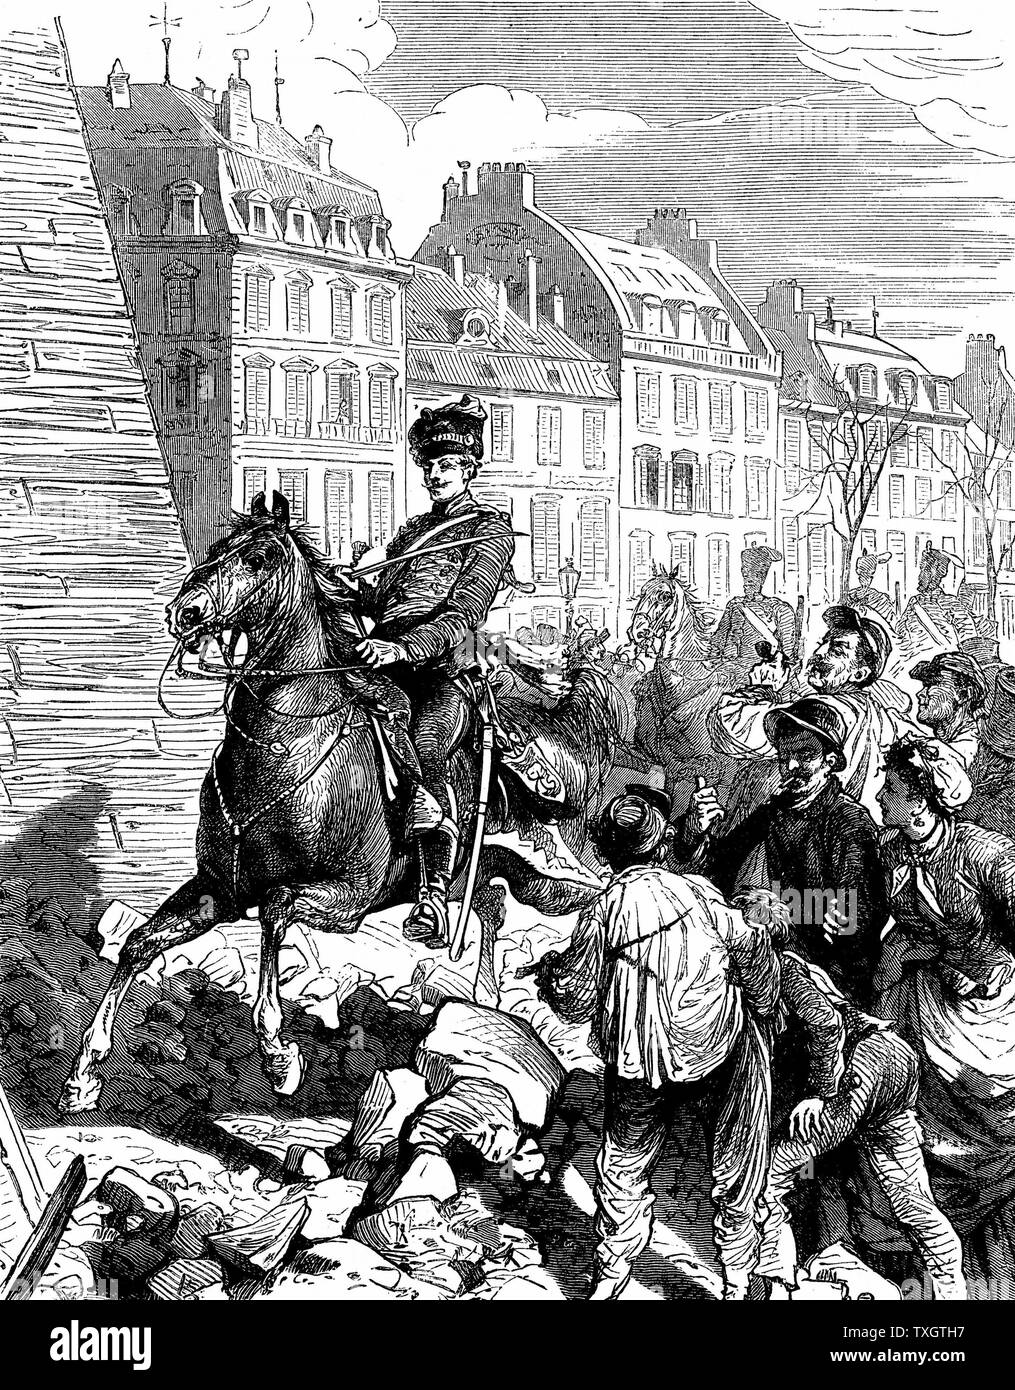 Franco-Prussian War 1870-1871: Occupation of Paris - the first German in Paris, February 1871 c1880 Wood engraving Stock Photo